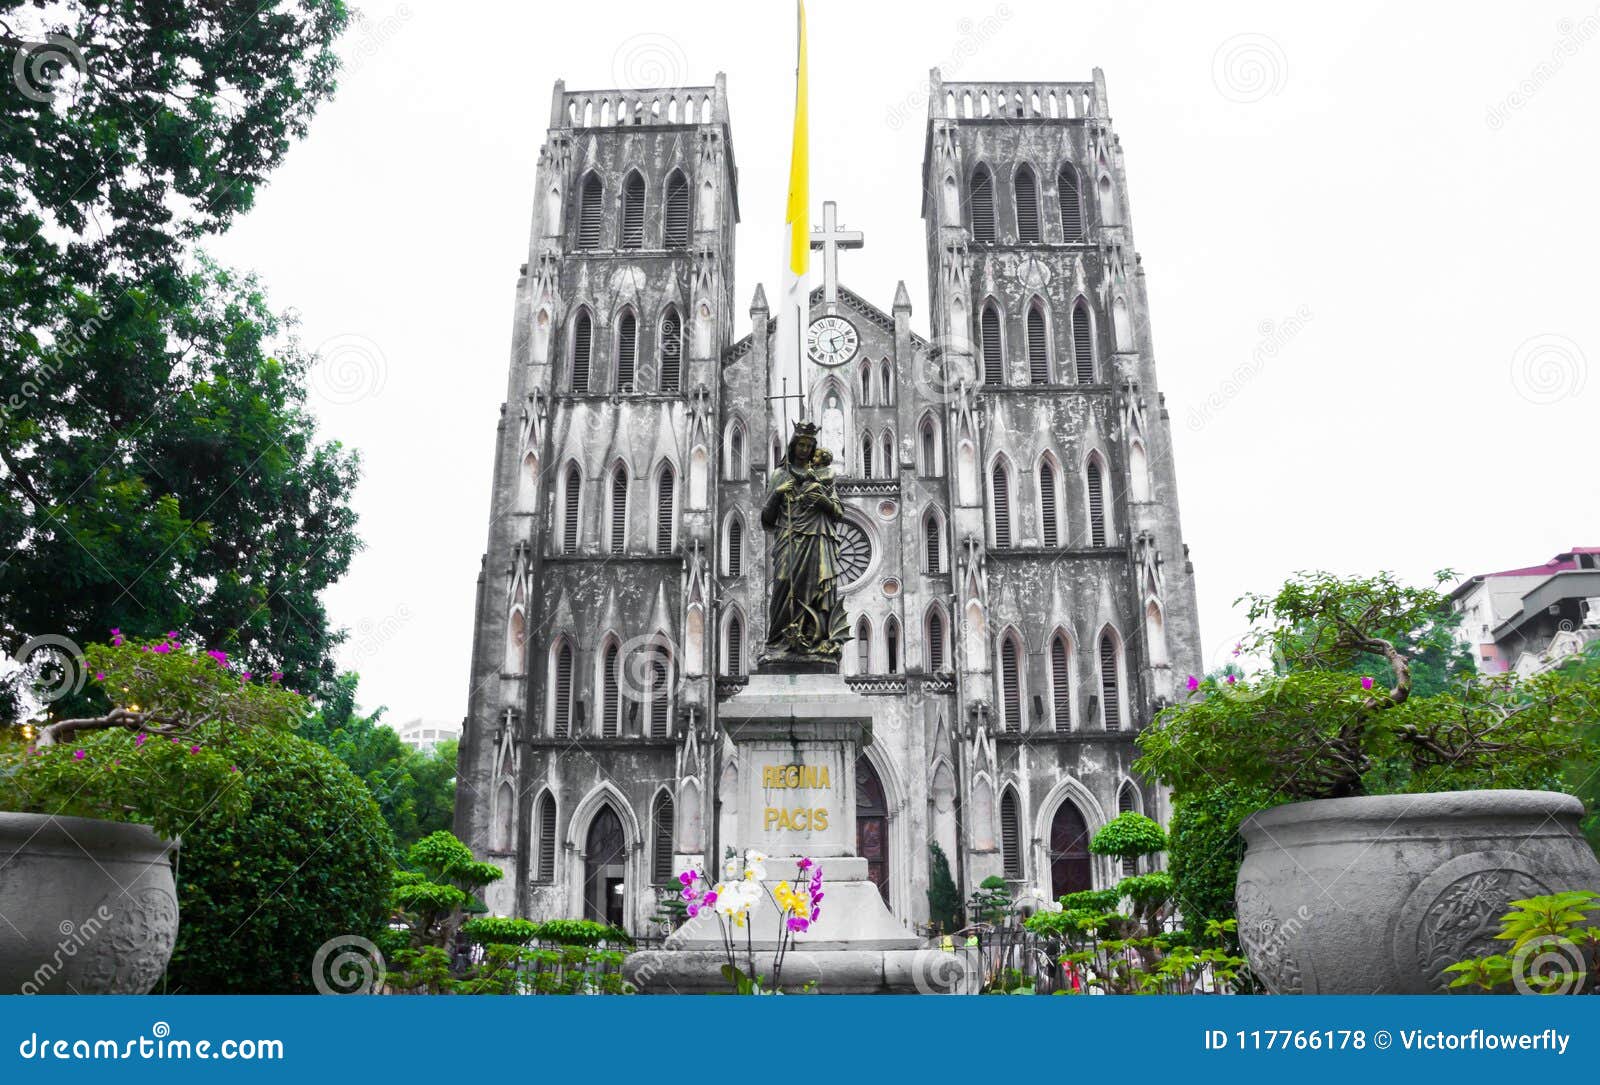 st. joseph`s cathedral and regina pacis queen of peace statue in front, hanoi, vietnam. st. joseph`s cathedral is a neogothic